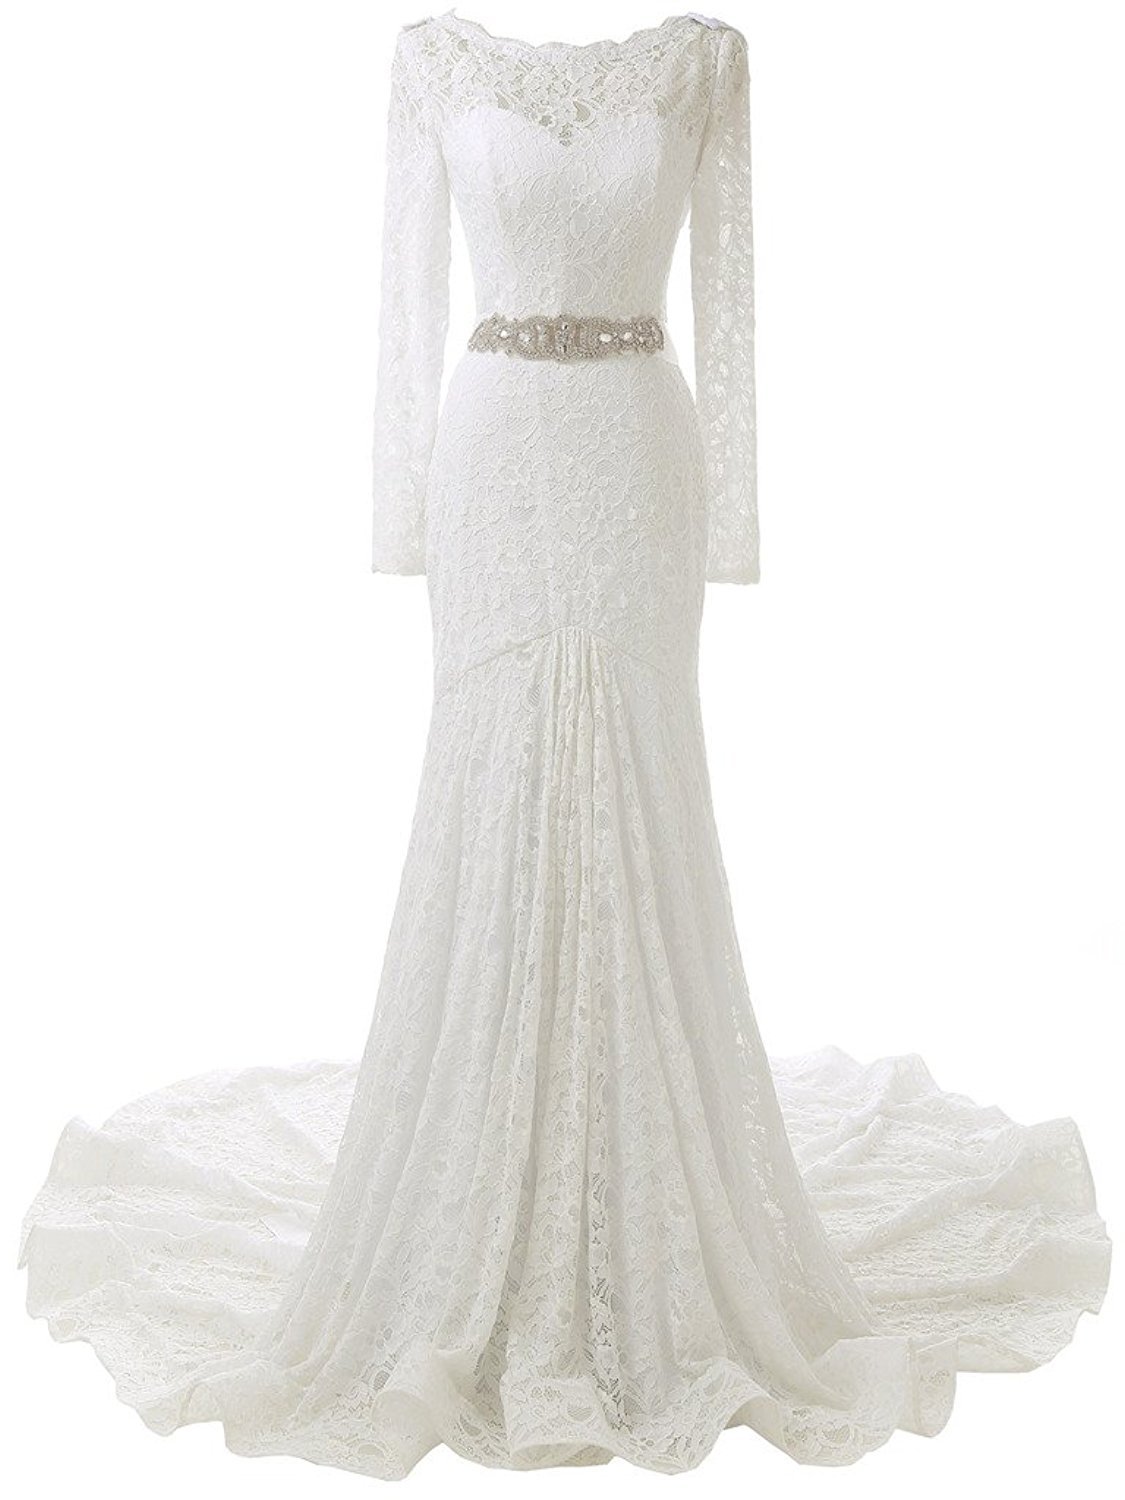 Ivory White Lace Wedding Dress Scoop Neck Women Beaded Floor Length Bridal Gowns